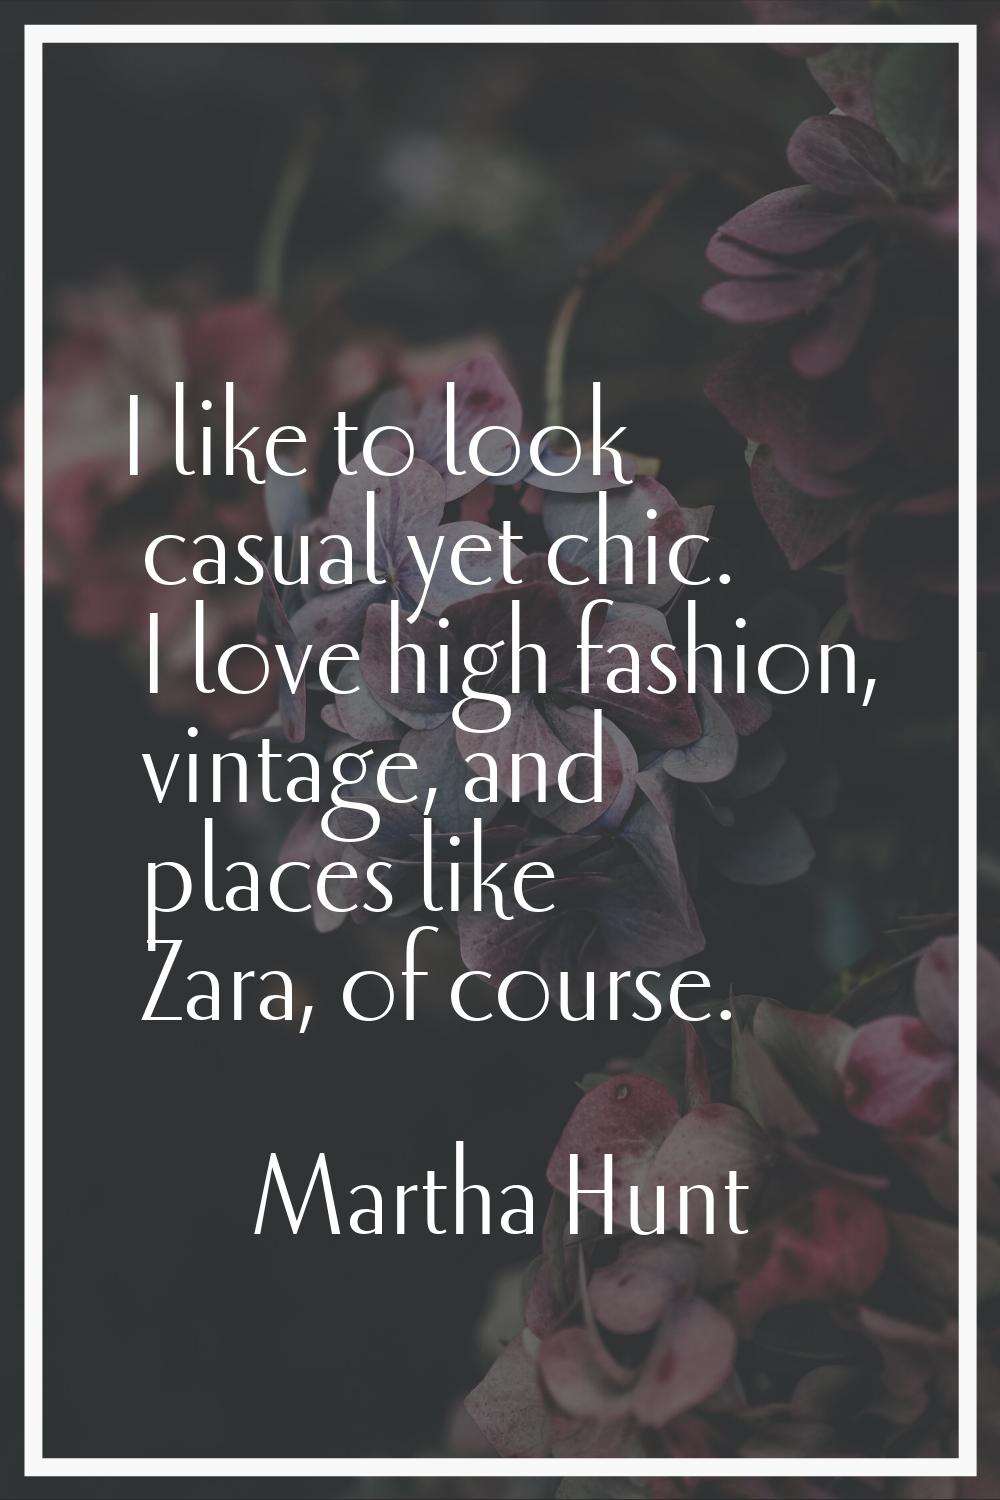 I like to look casual yet chic. I love high fashion, vintage, and places like Zara, of course.